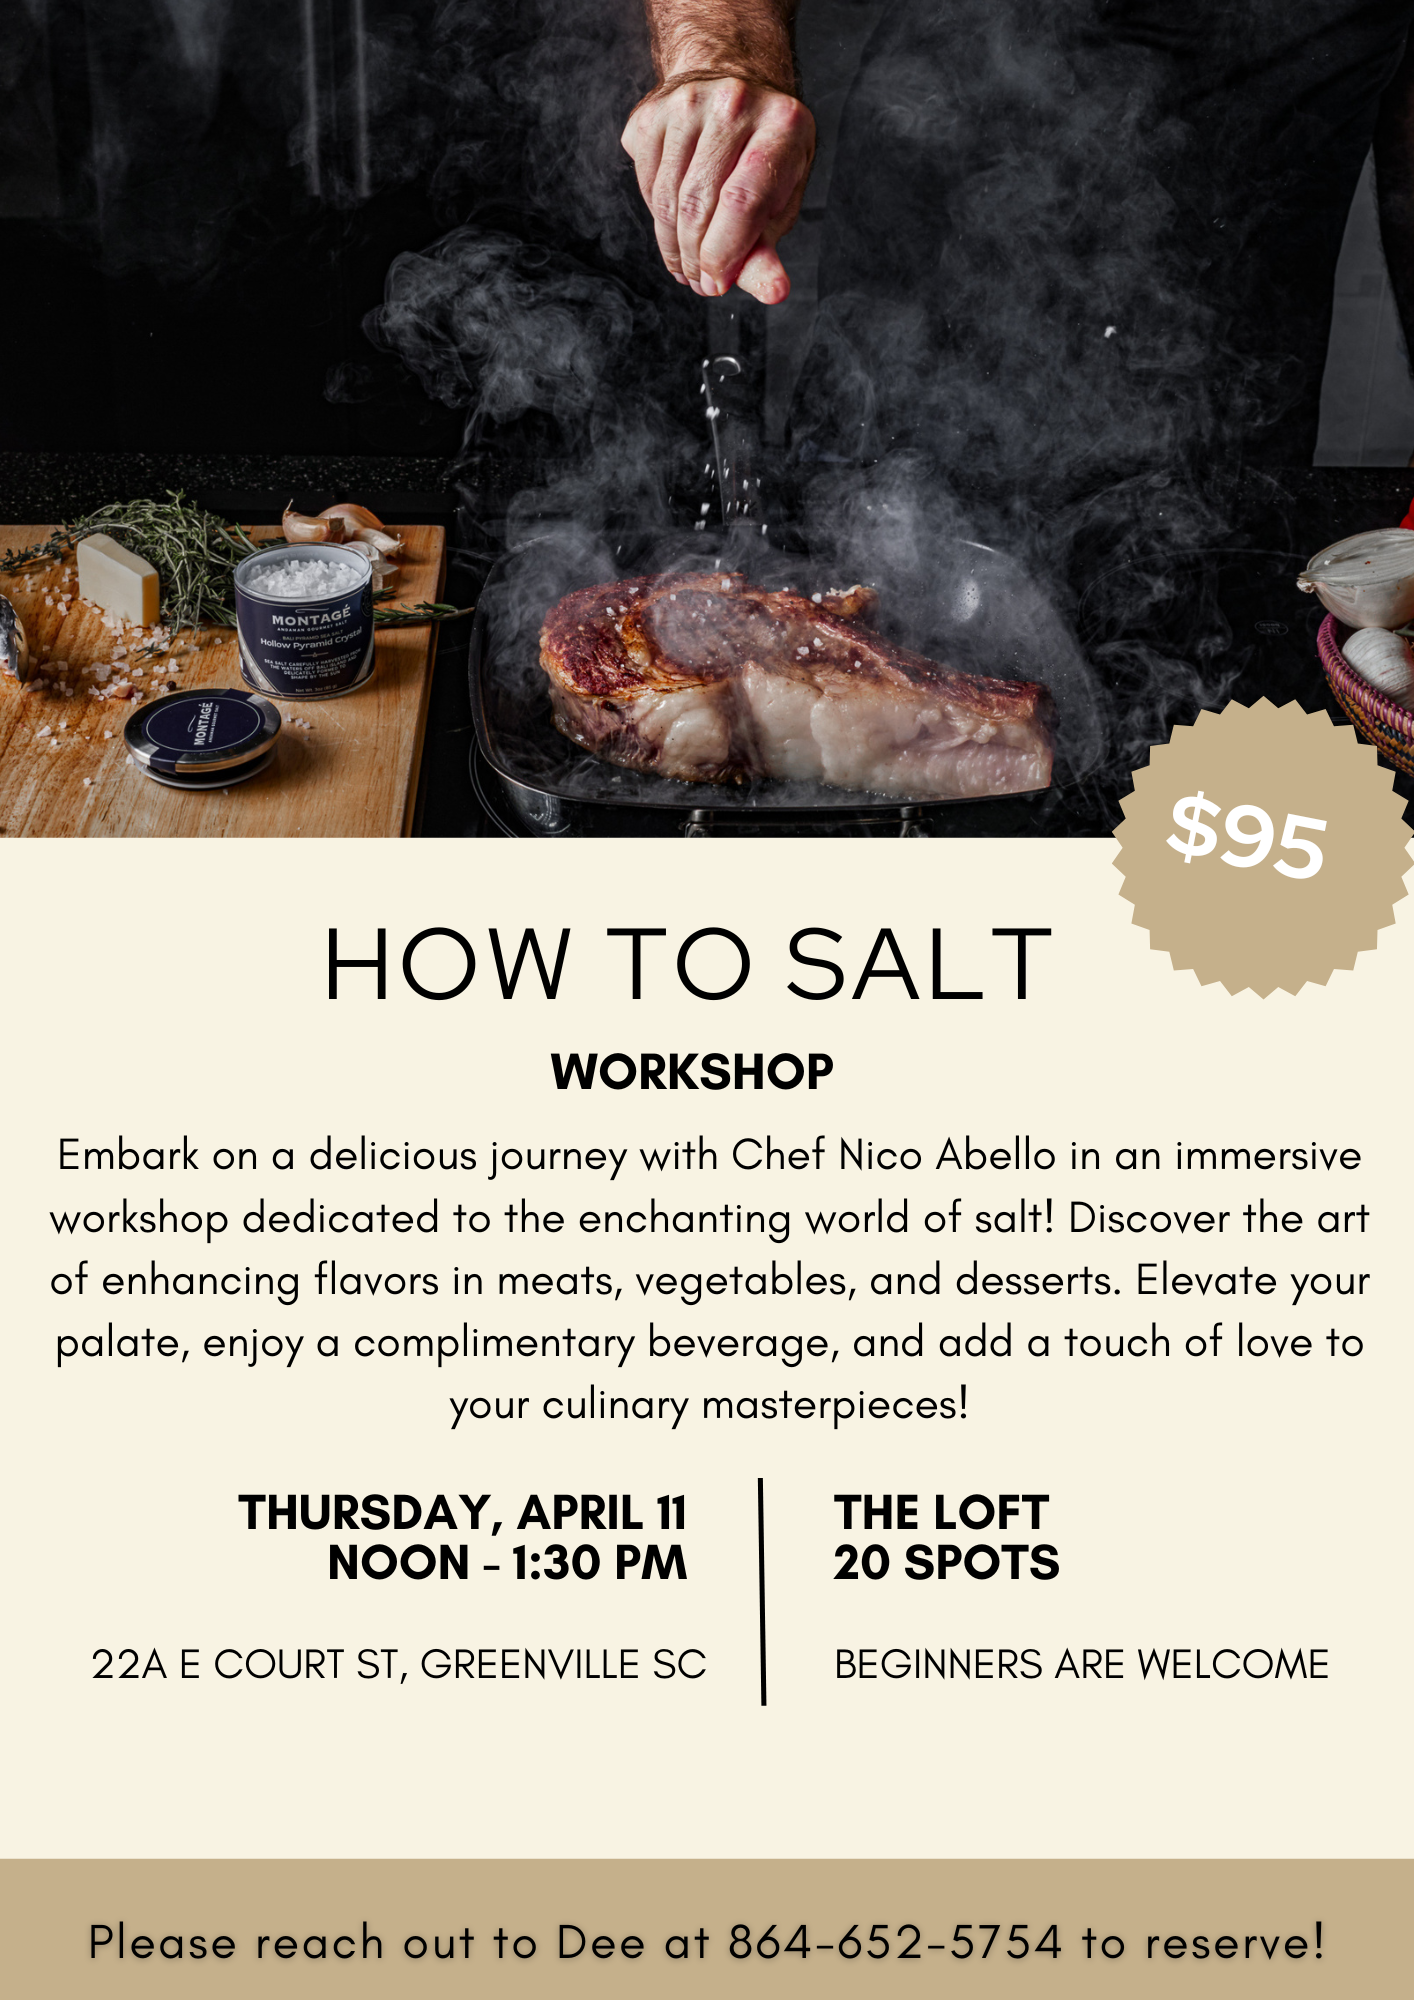 How to Salt - Workshop with Chef Nico Abello